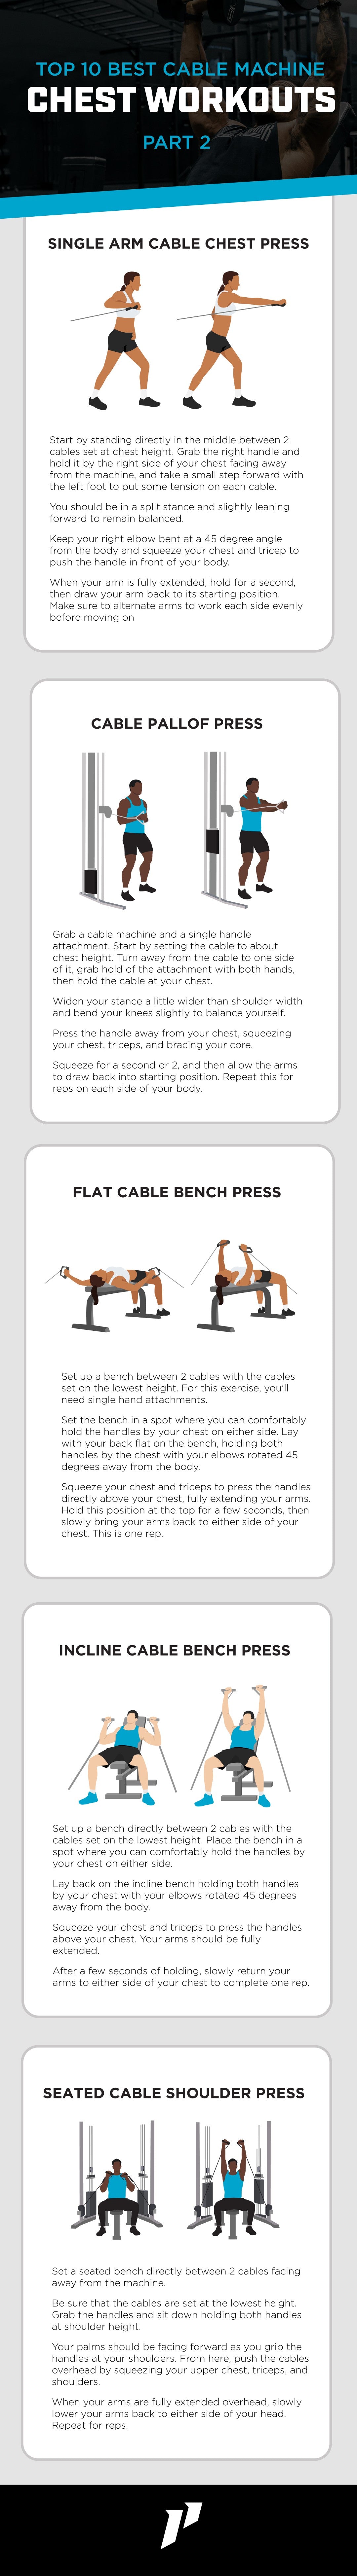 The 10 Best Cable Machine Chest Workouts